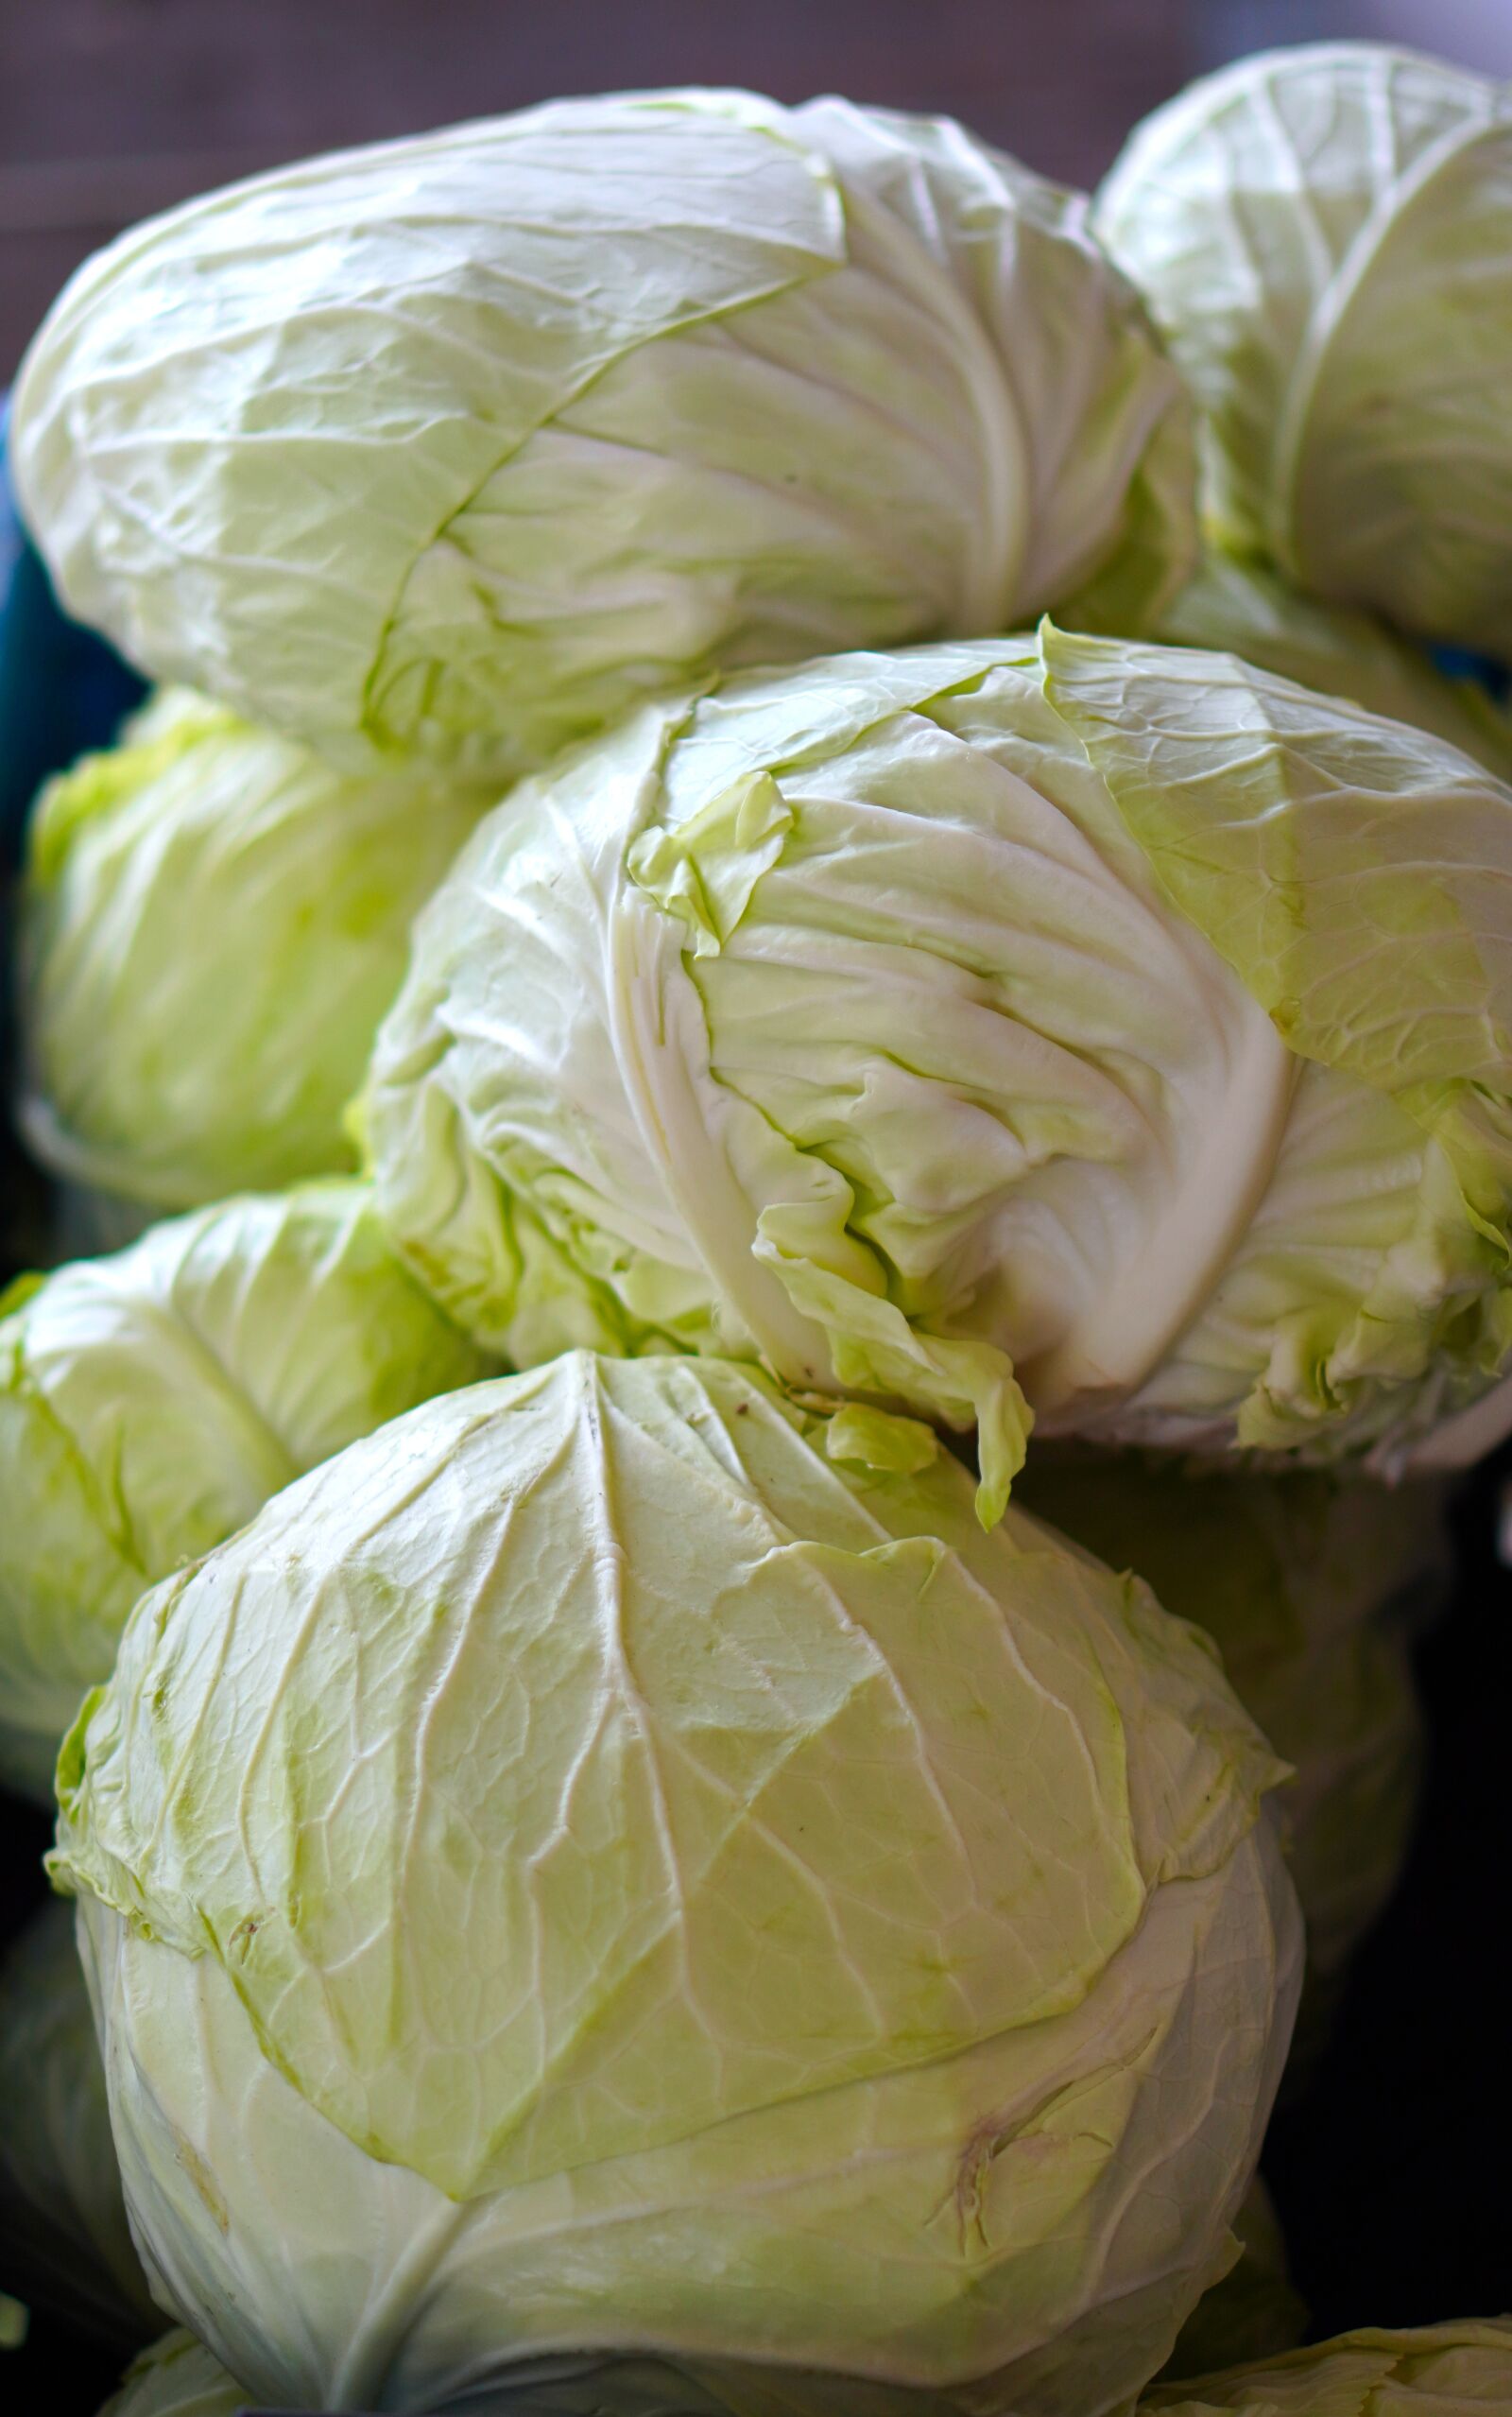 E 50mm F1.8 OSS sample photo. "Vegetable, cabbages, food" photography